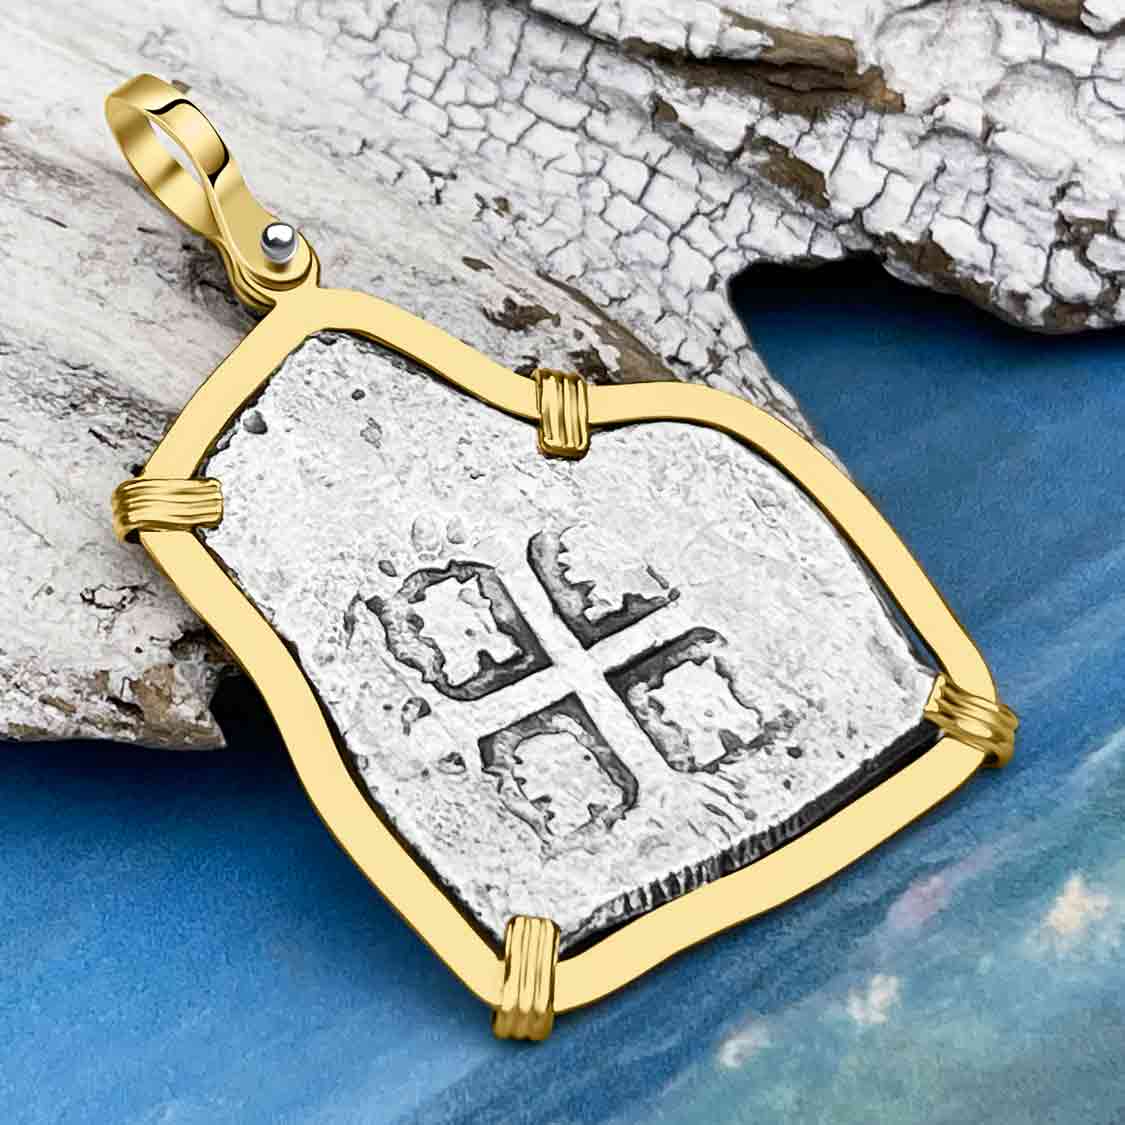 Rooswijk Dutch East India Company Shipwreck 4 Reale Piece of Eight in 14K Gold Pendant